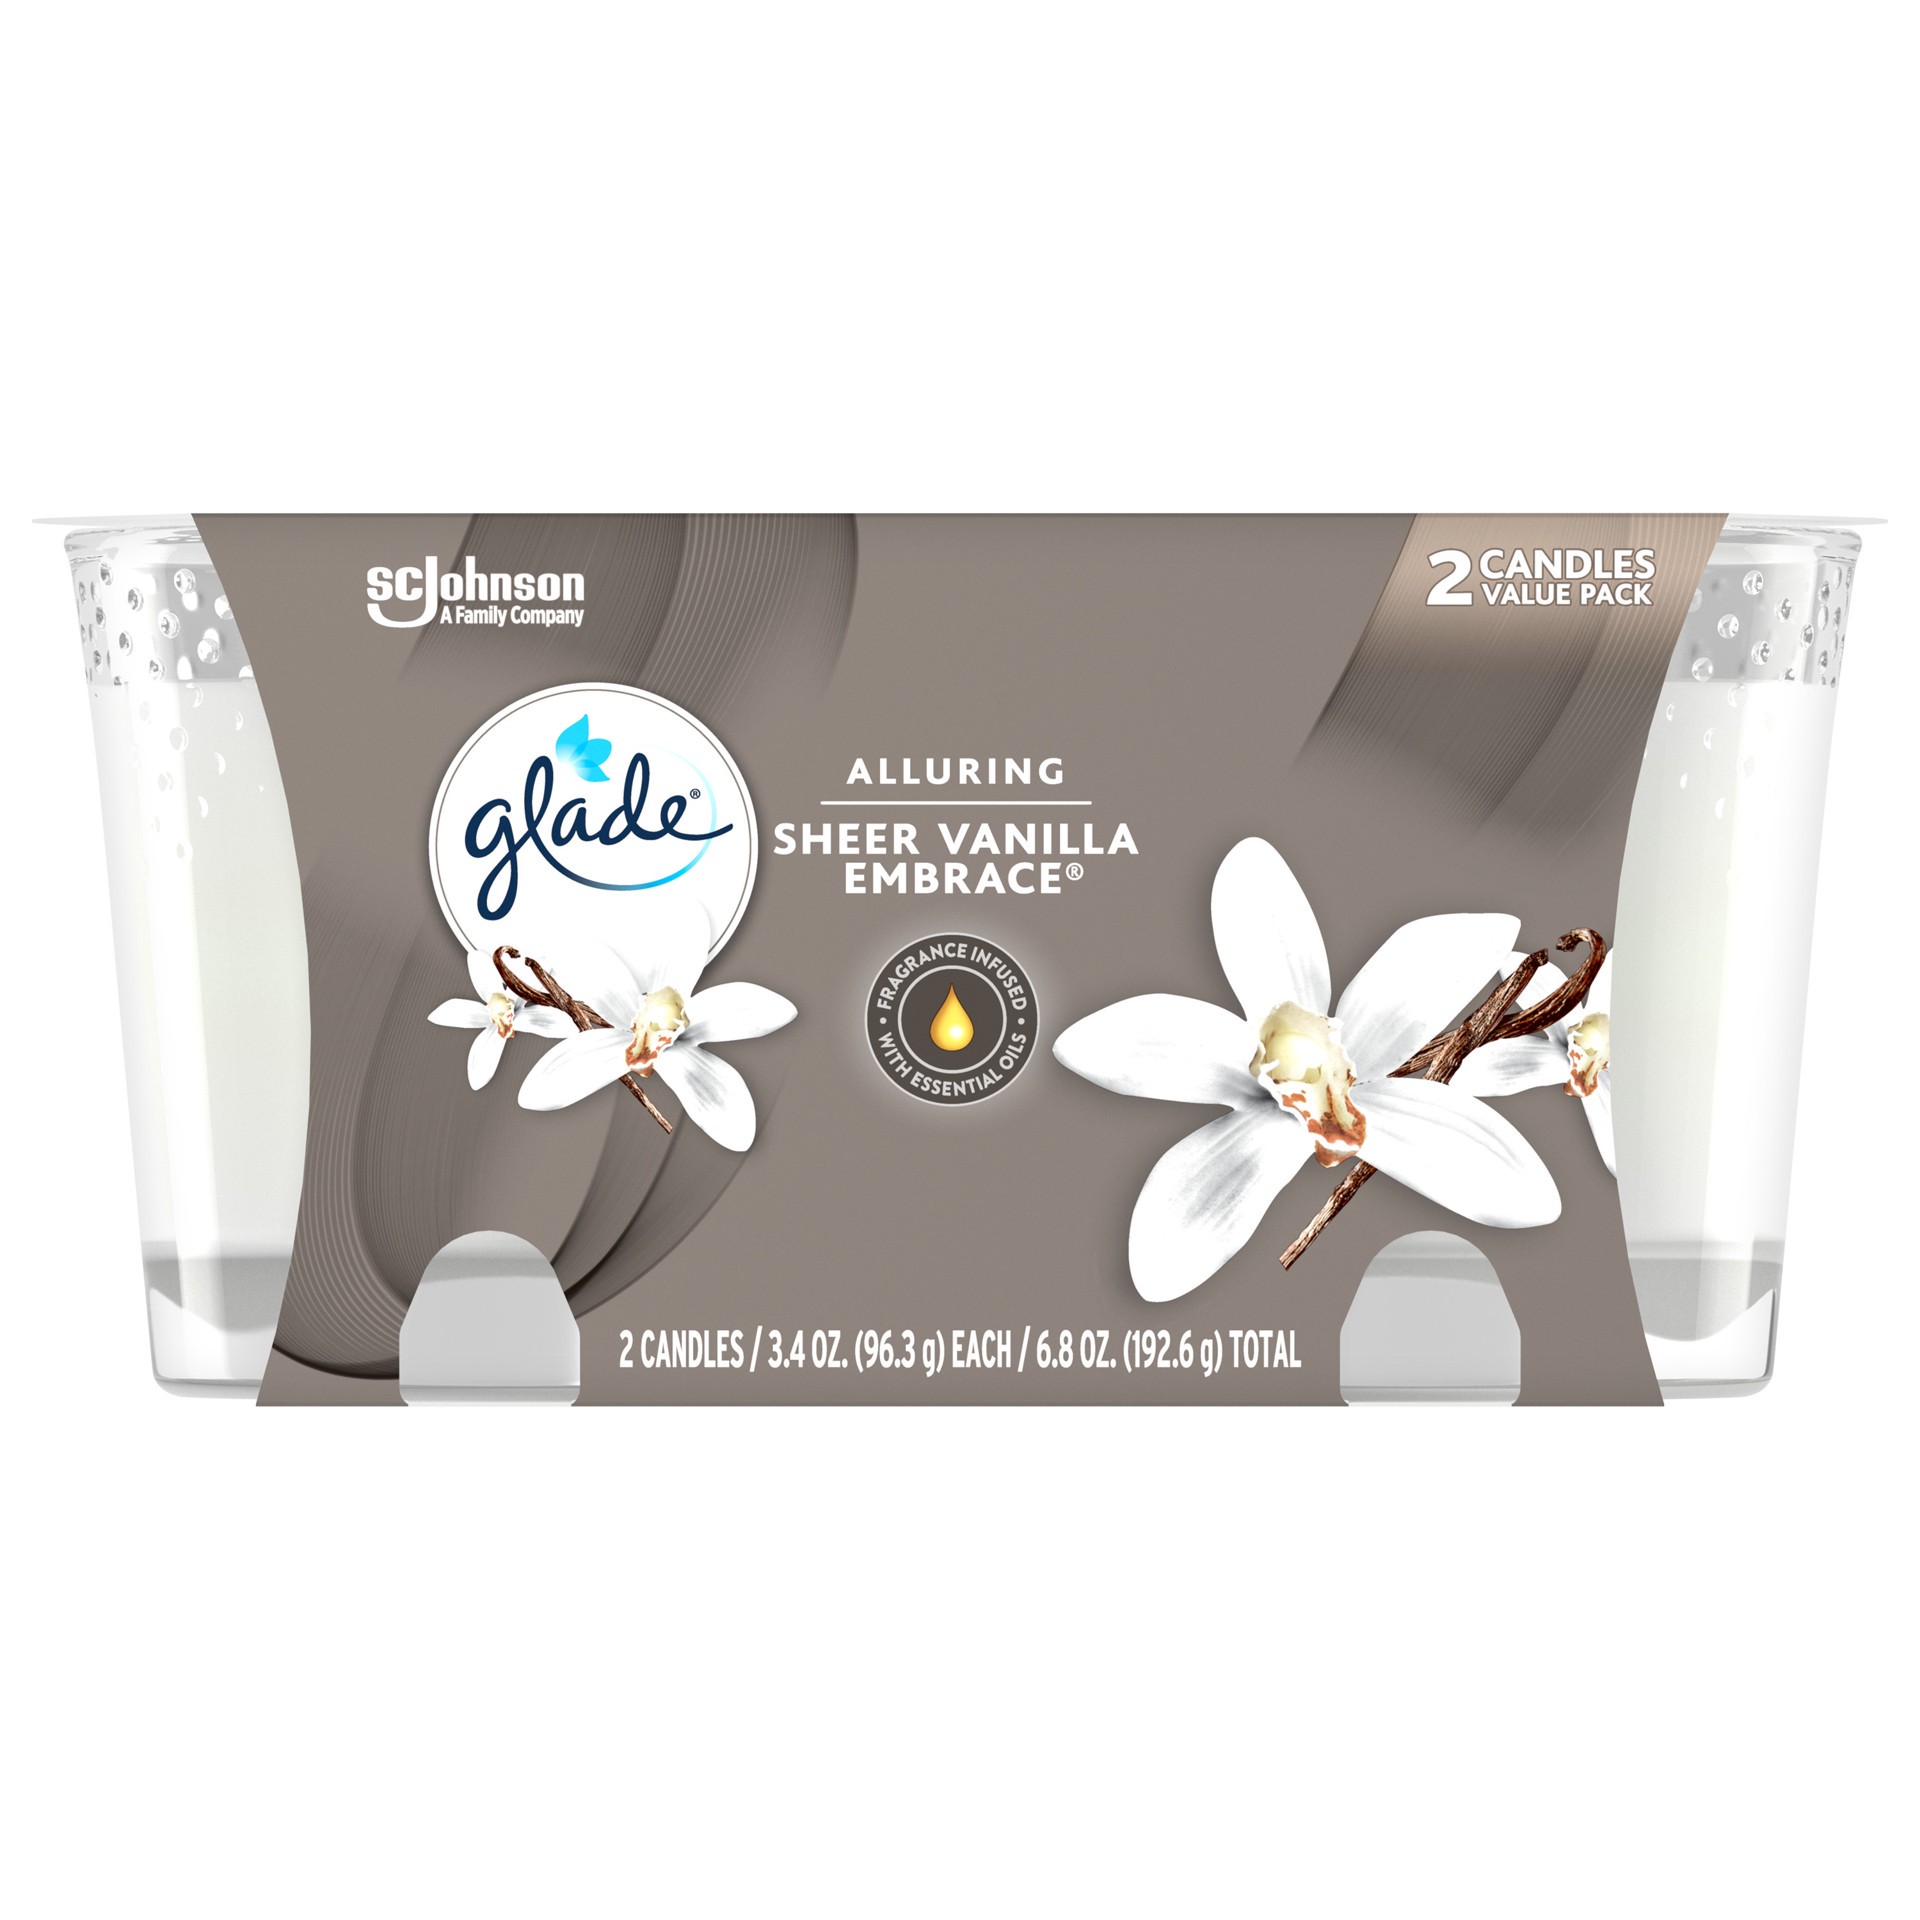 slide 1 of 5, Glade Candle Alluring Sheer Vanilla Embrace Scent, 1-Wick, 3.4 oz (96.3 g) Each, 2 Counts, Fragrance Infused with Essential Oils, Notes of Vanilla Blossom, White Orchid, Sandalwood, Lead-Free Wick, 6.8 oz